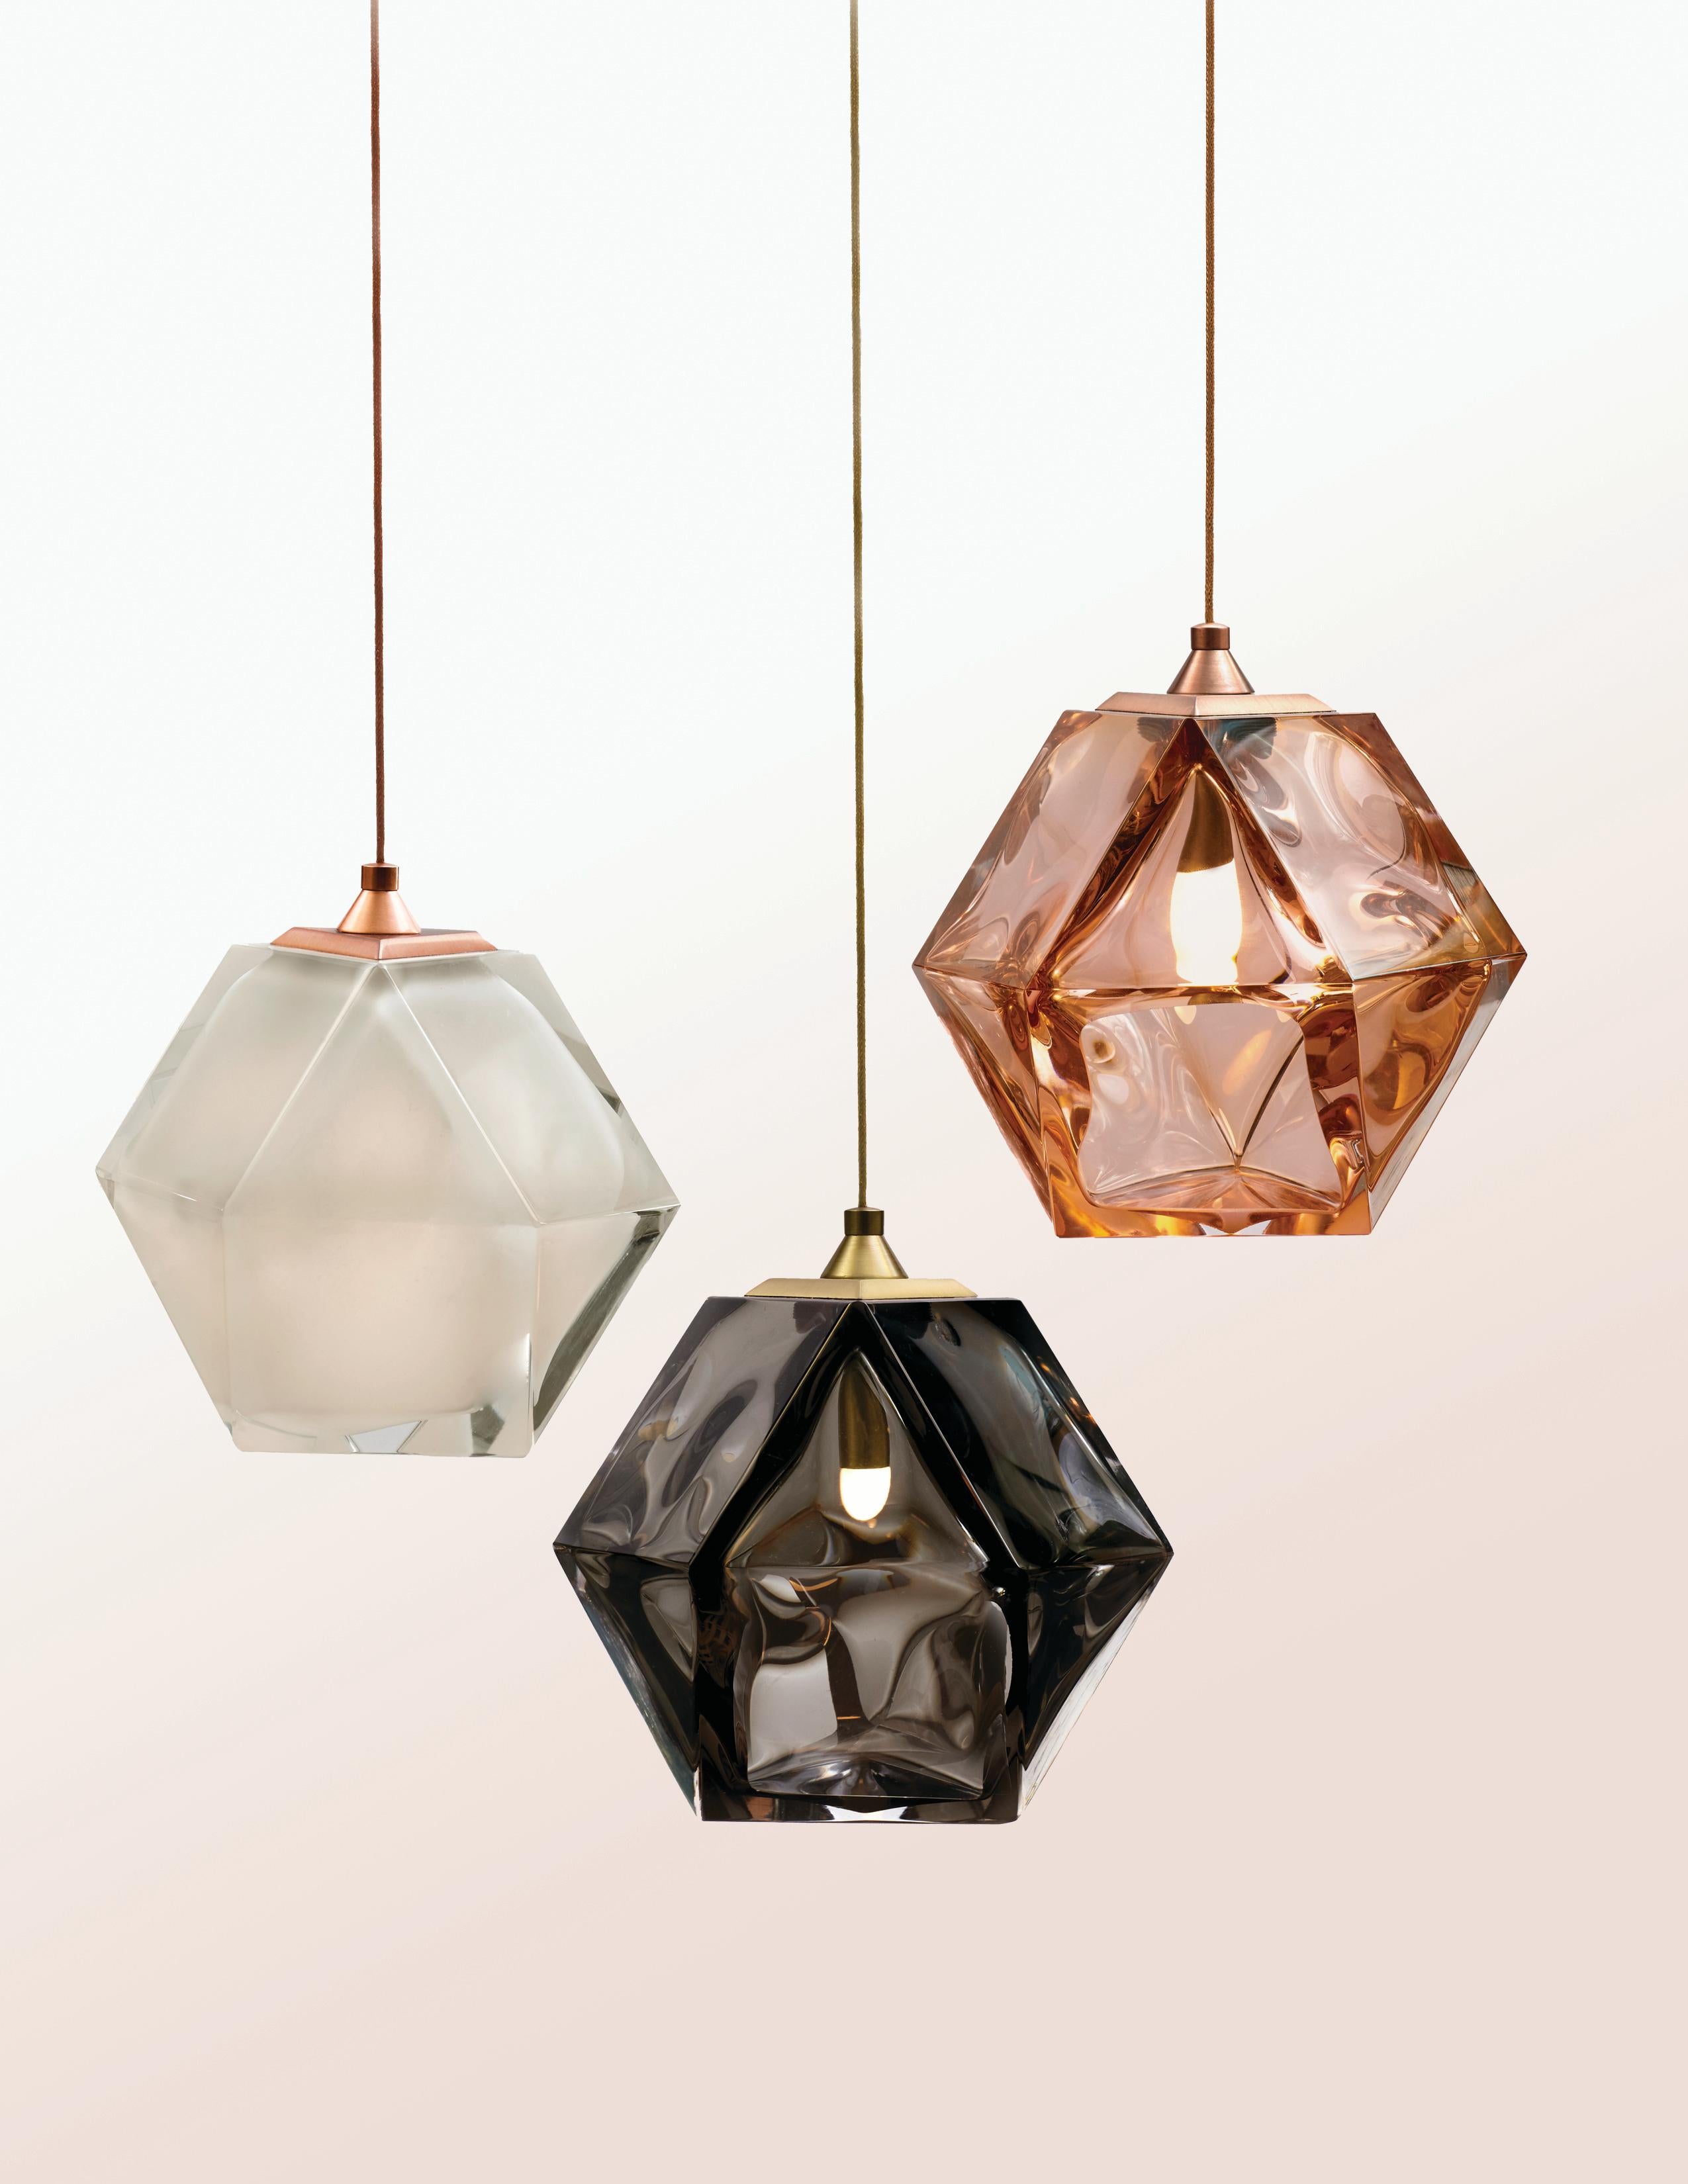 Single gem-like pendants hung from a finely braided metallic-cable, reminiscent of custom crafted jewelry, these exquisite pieces are available in smoked-gray, Alabaster-White and California-pink glass. The welles silhouette is created through an